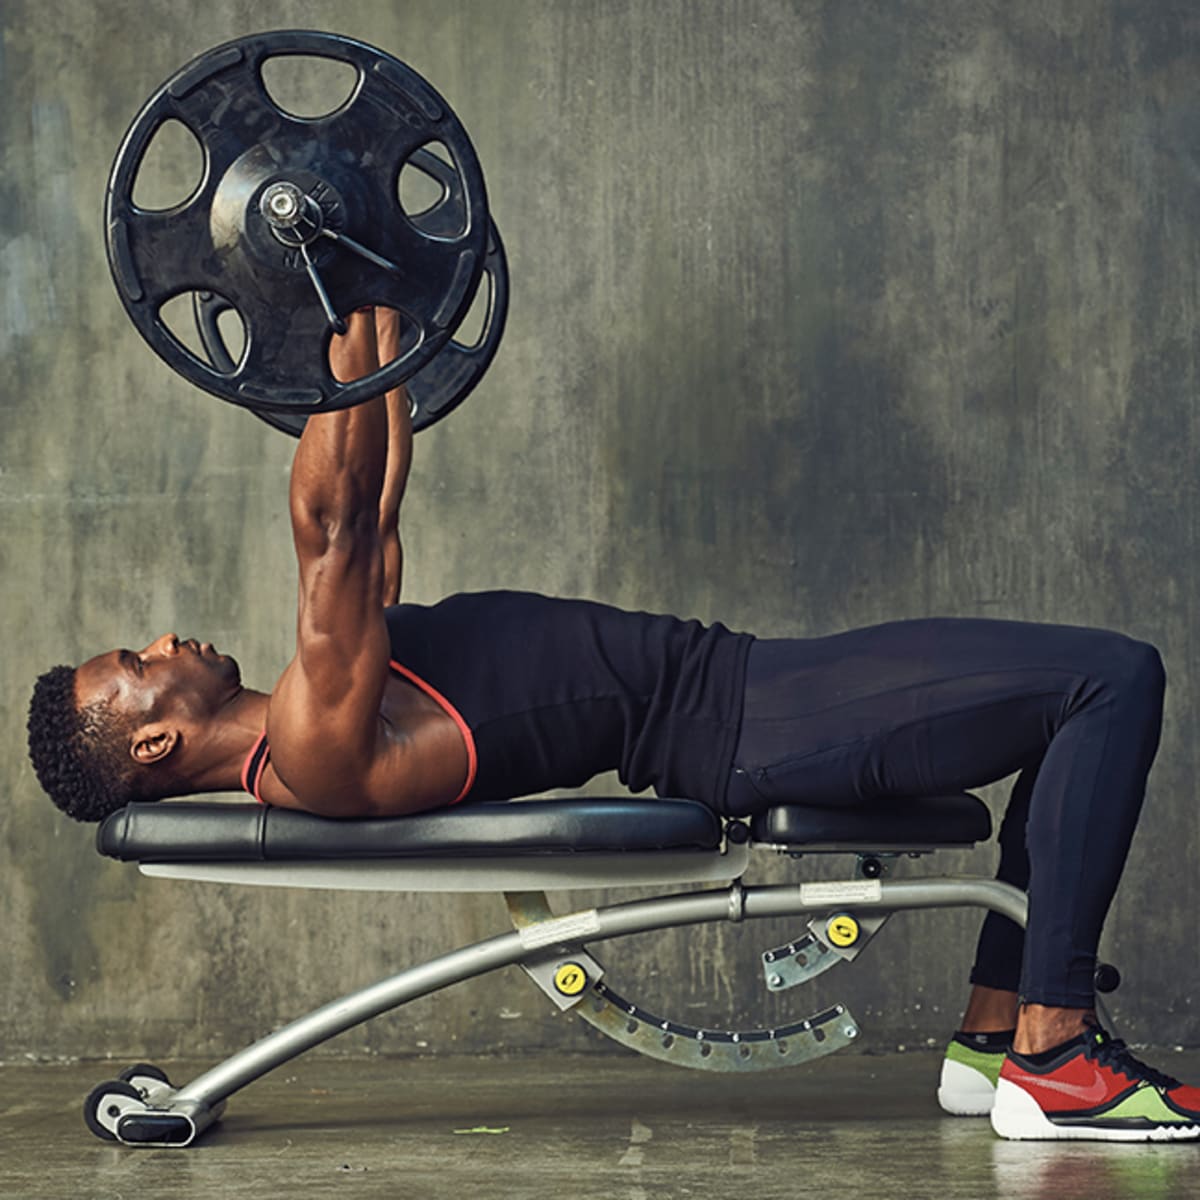 10 Deadlift Alternatives Without Pain: Bodyweight, Dumbbells, and More